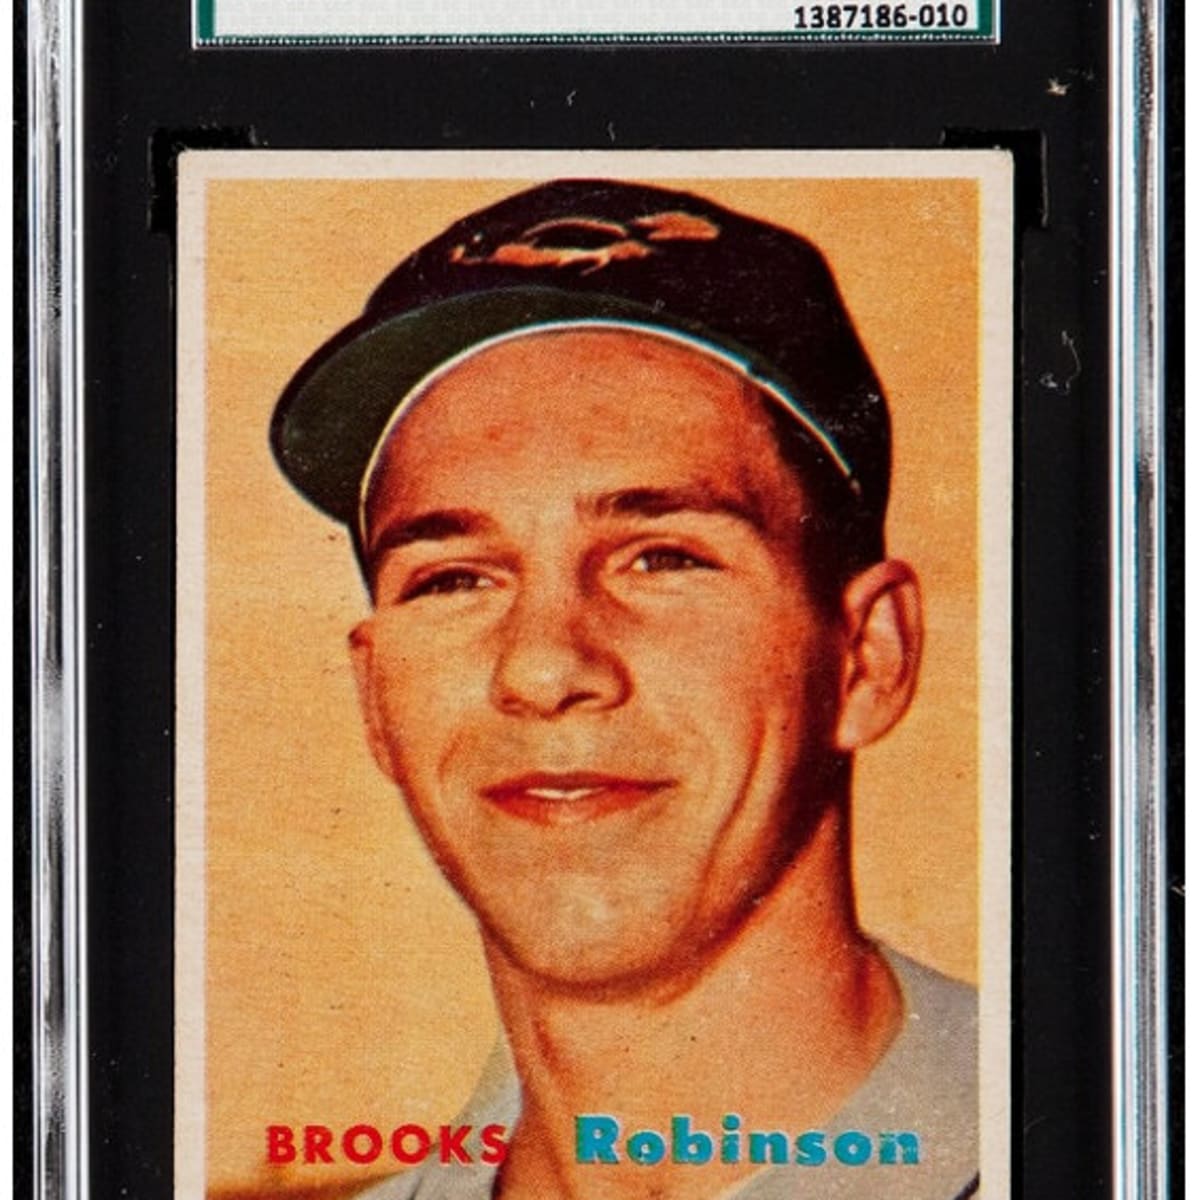 The Fleer Sticker Project: New Photo of Brooks Robinson in the